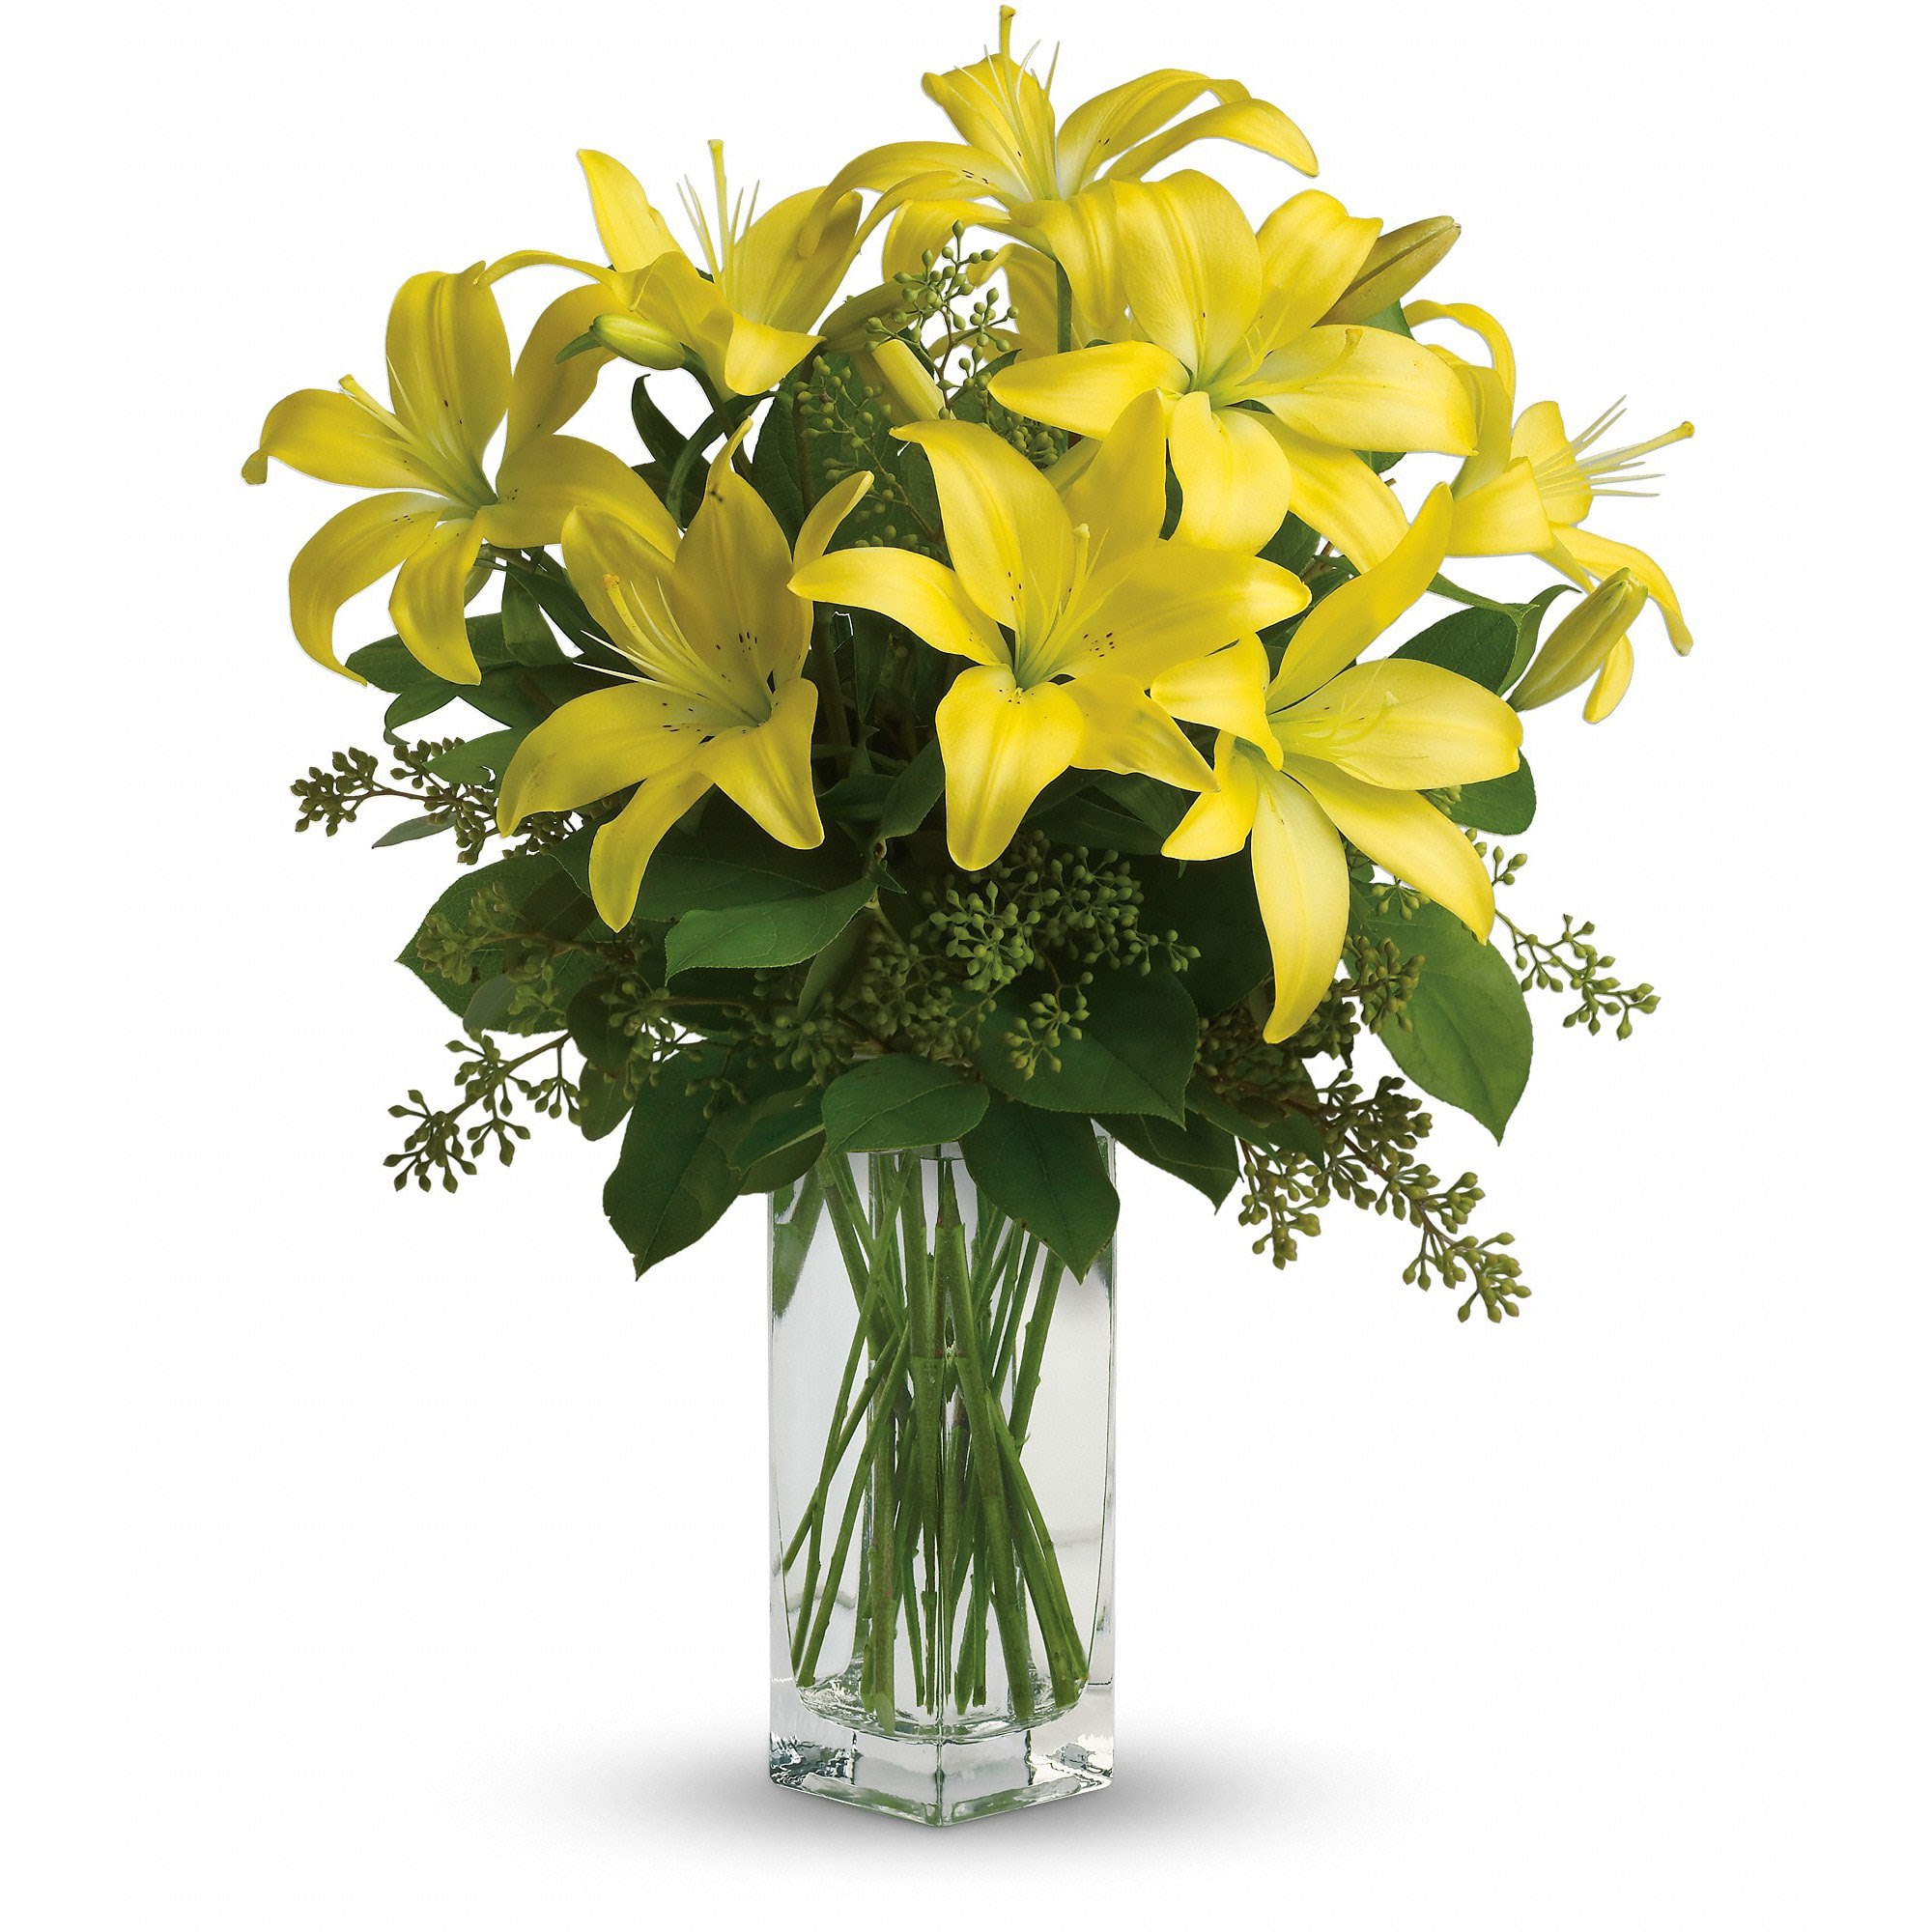 Teleflora's Lily Sunshine (Standard) - When it comes to spring flowers, the lily reigns supreme. It's easy to see why in this gorgeous bouquet of bright yellow blooms.  